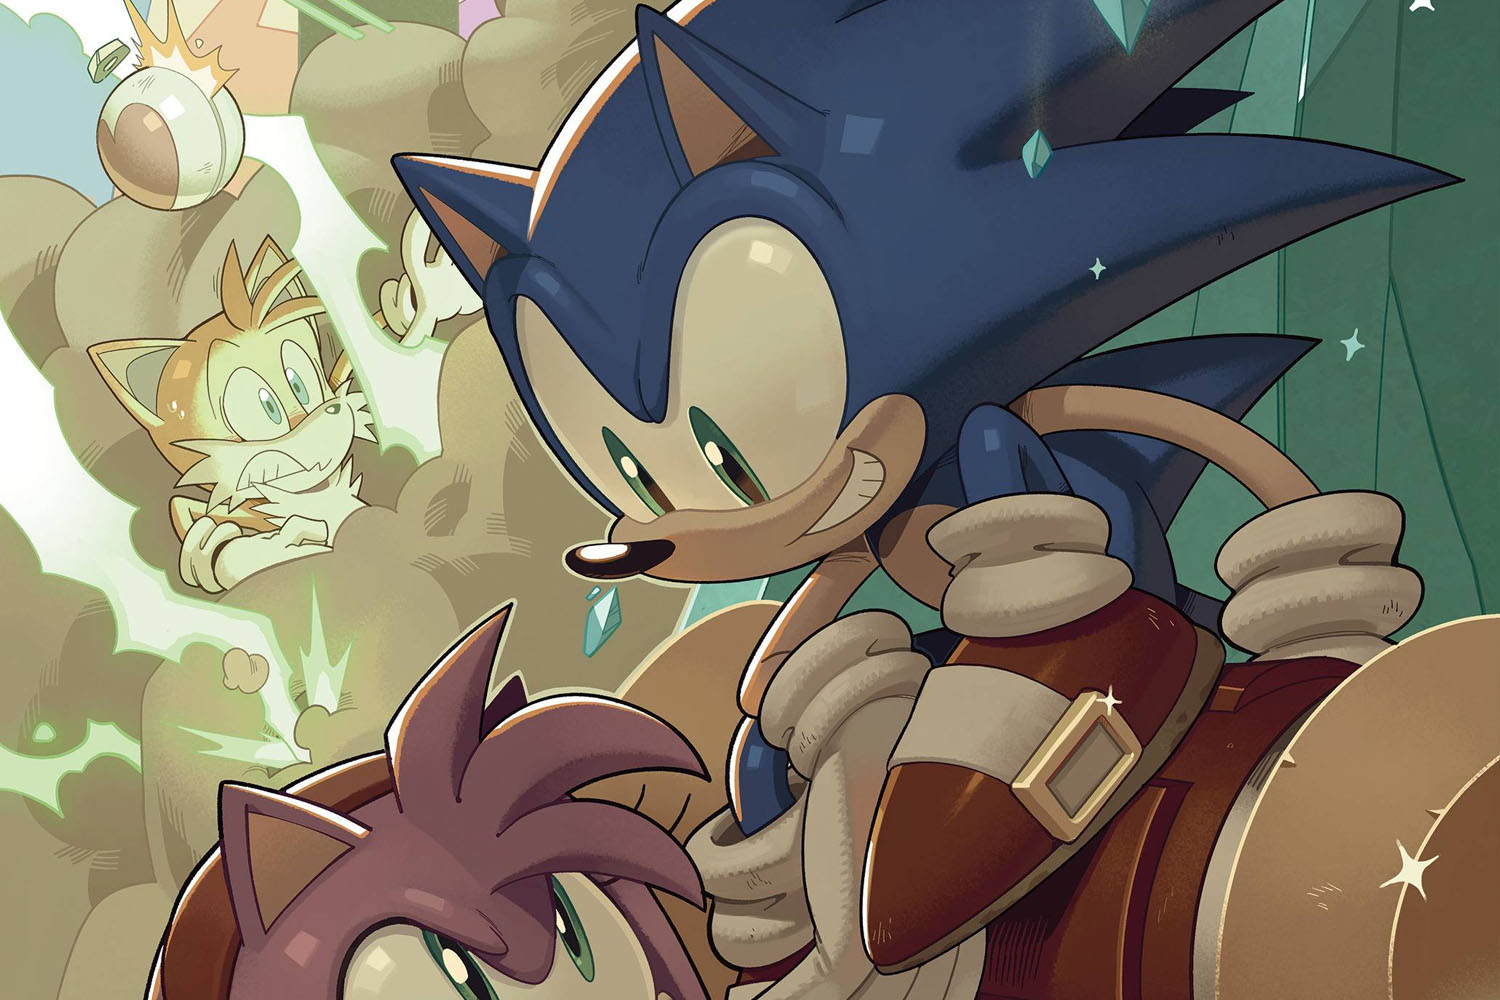 'Sonic the Hedgehog' #59 review